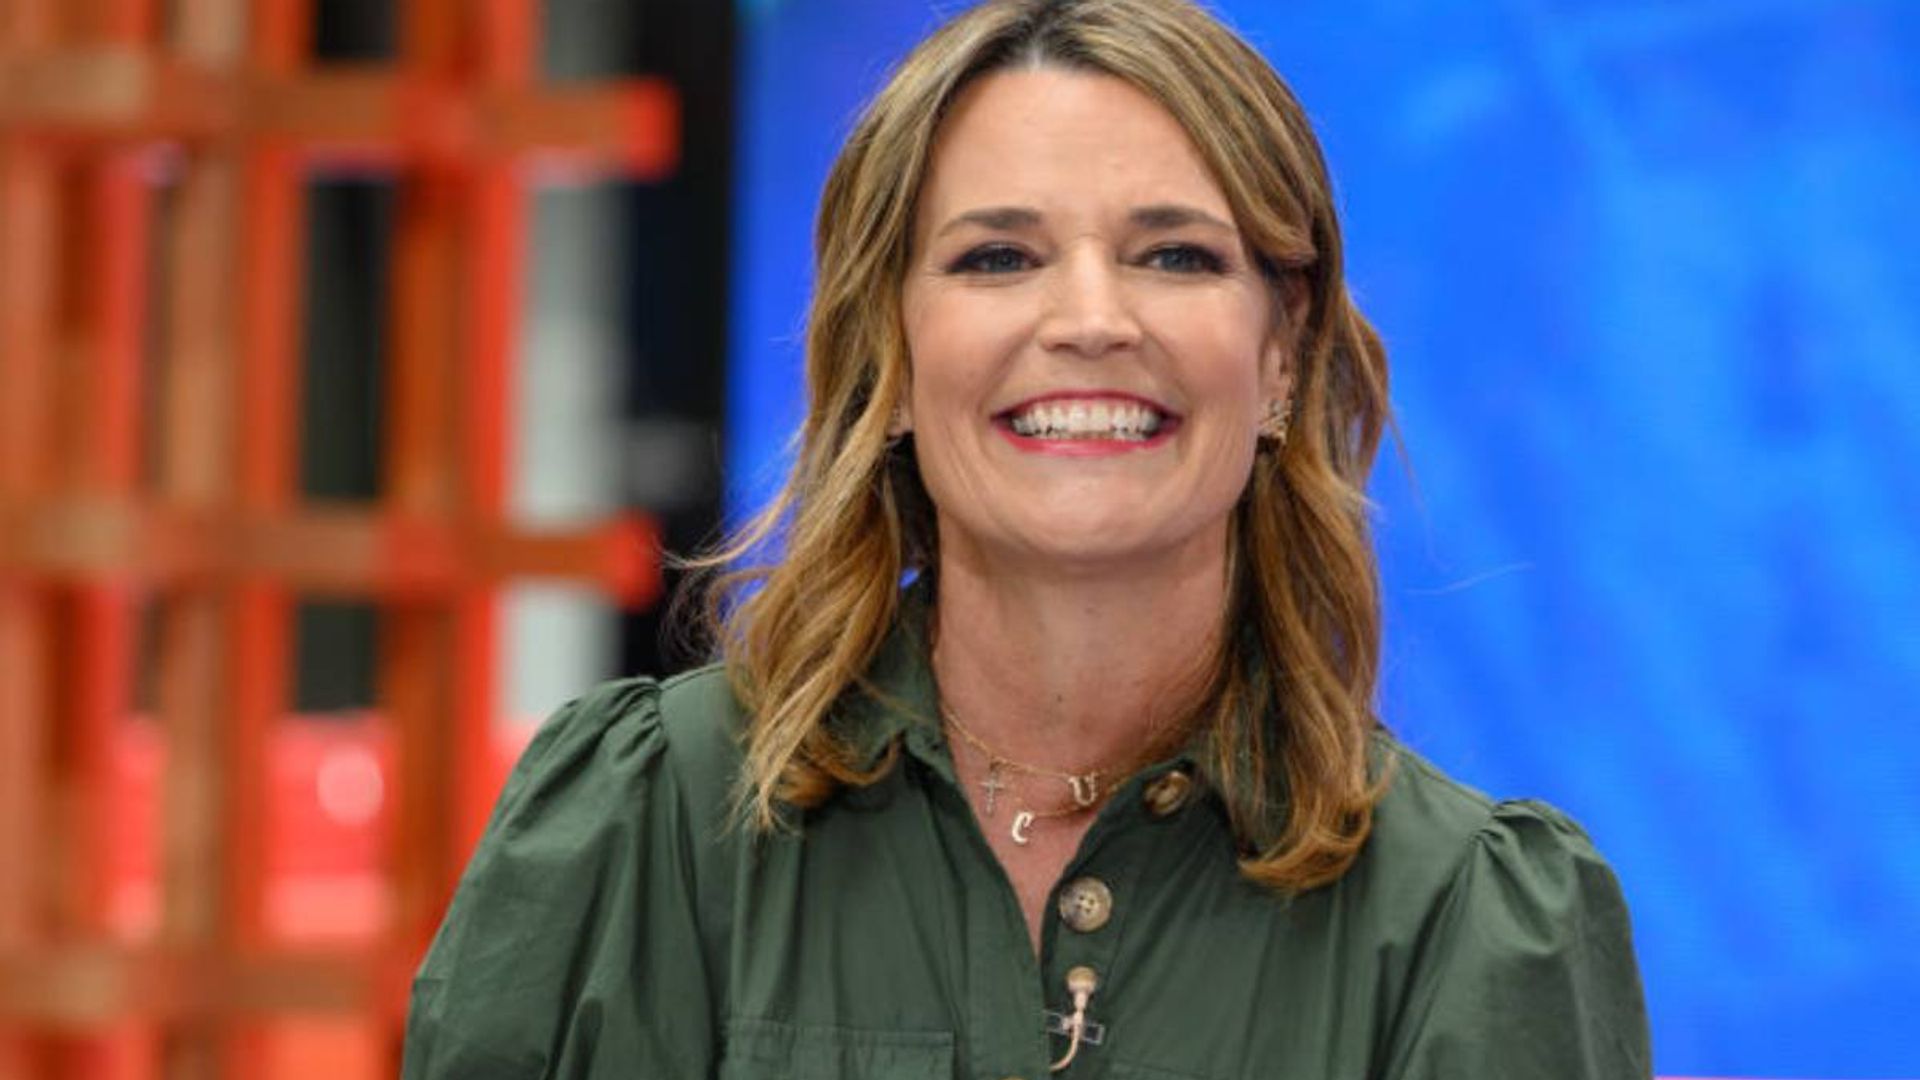 SAvannah Guthrie smiles on the set of Today NBC